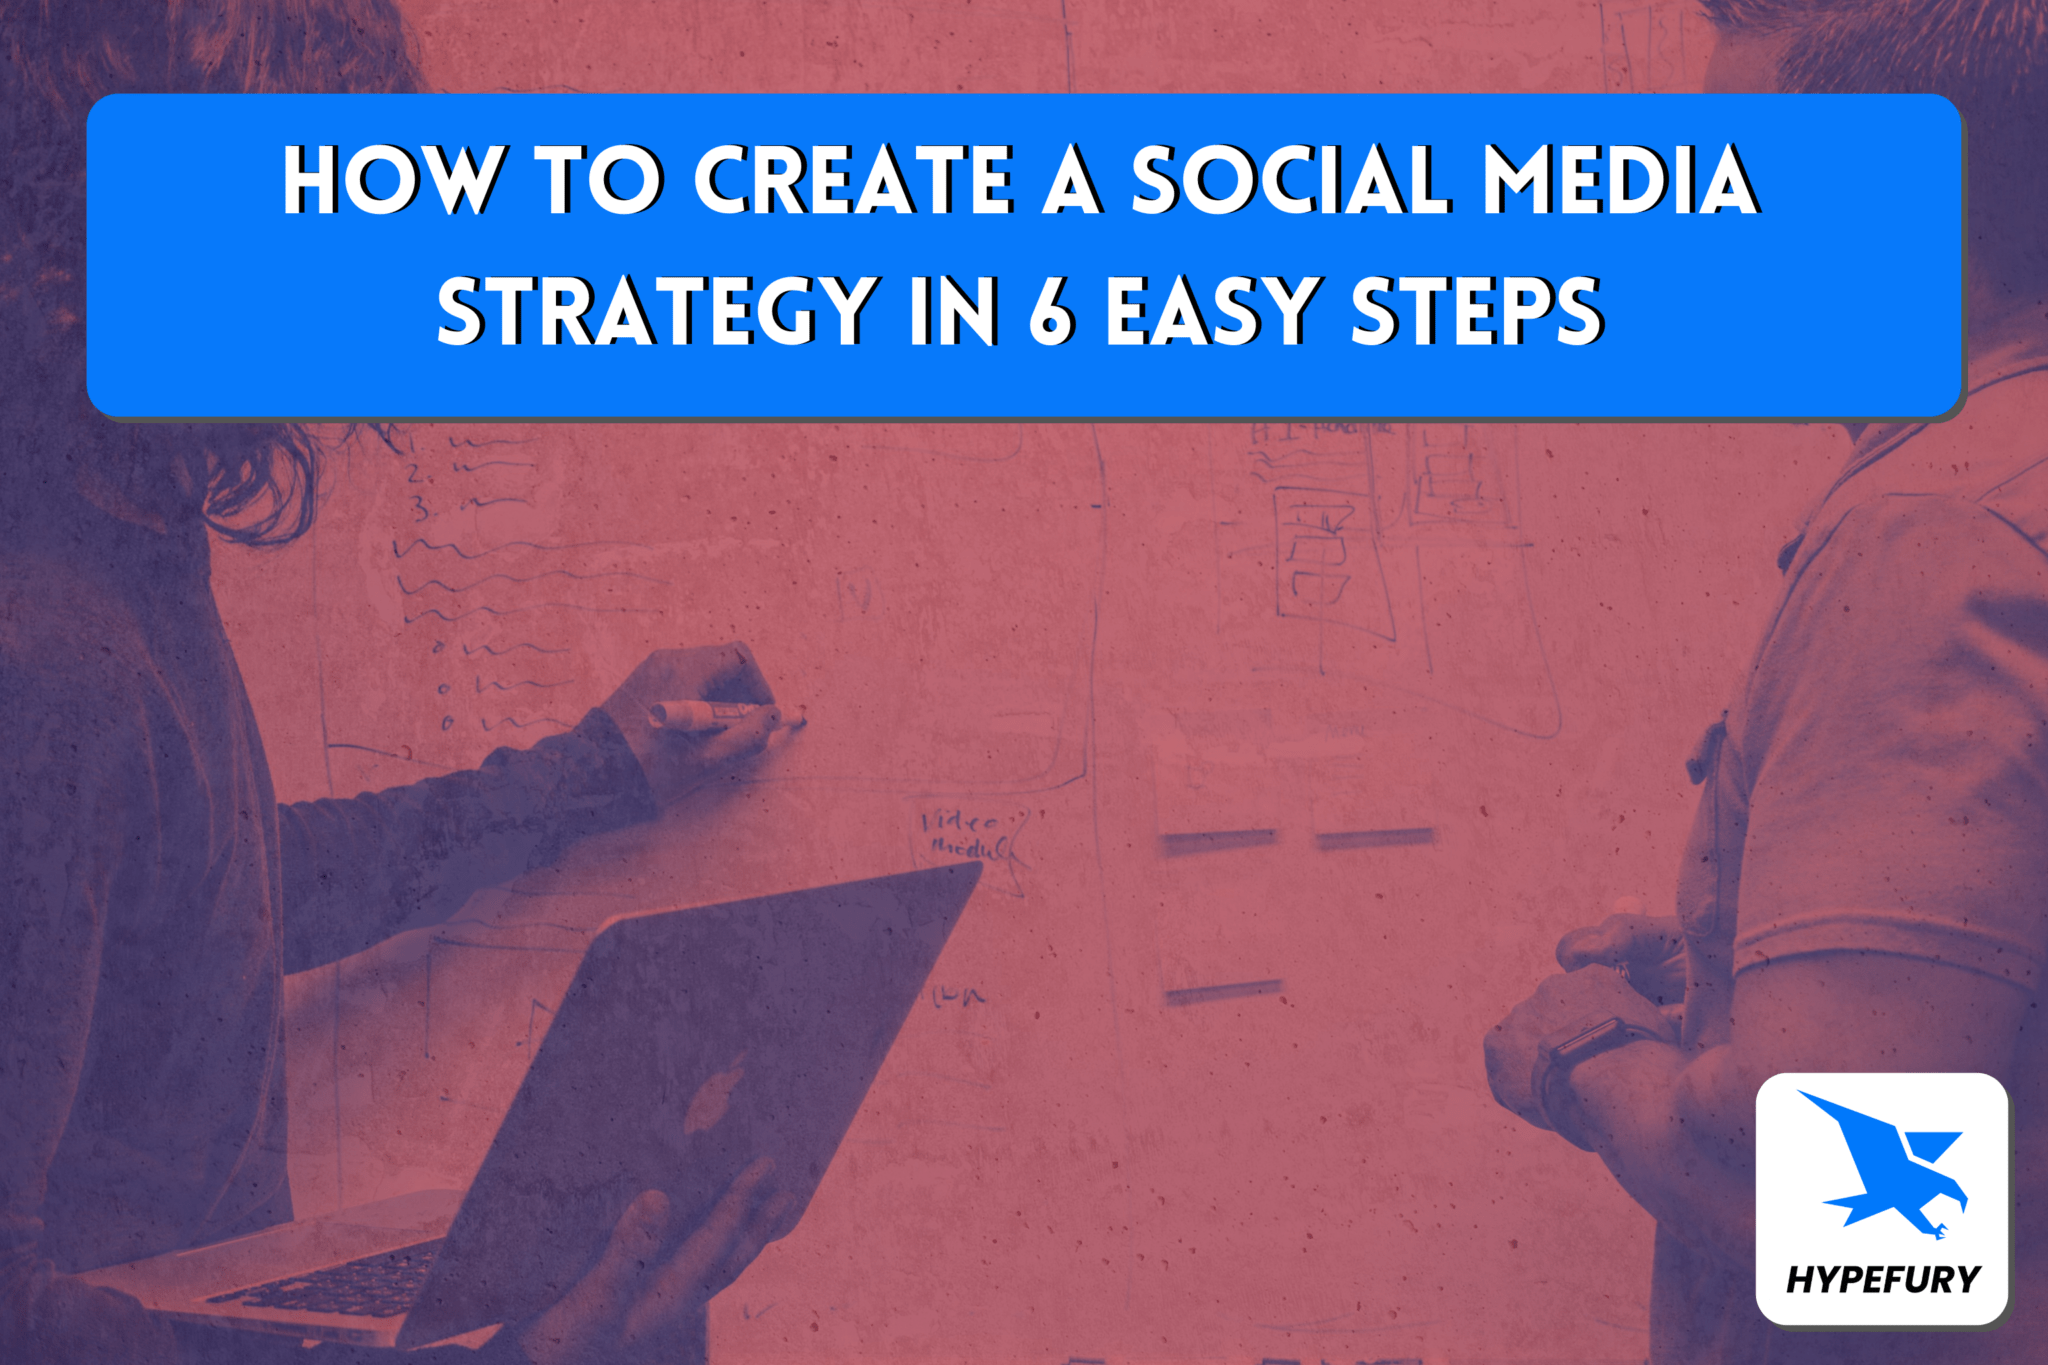 How to Create a Social Media Strategy in 6 Easy Steps